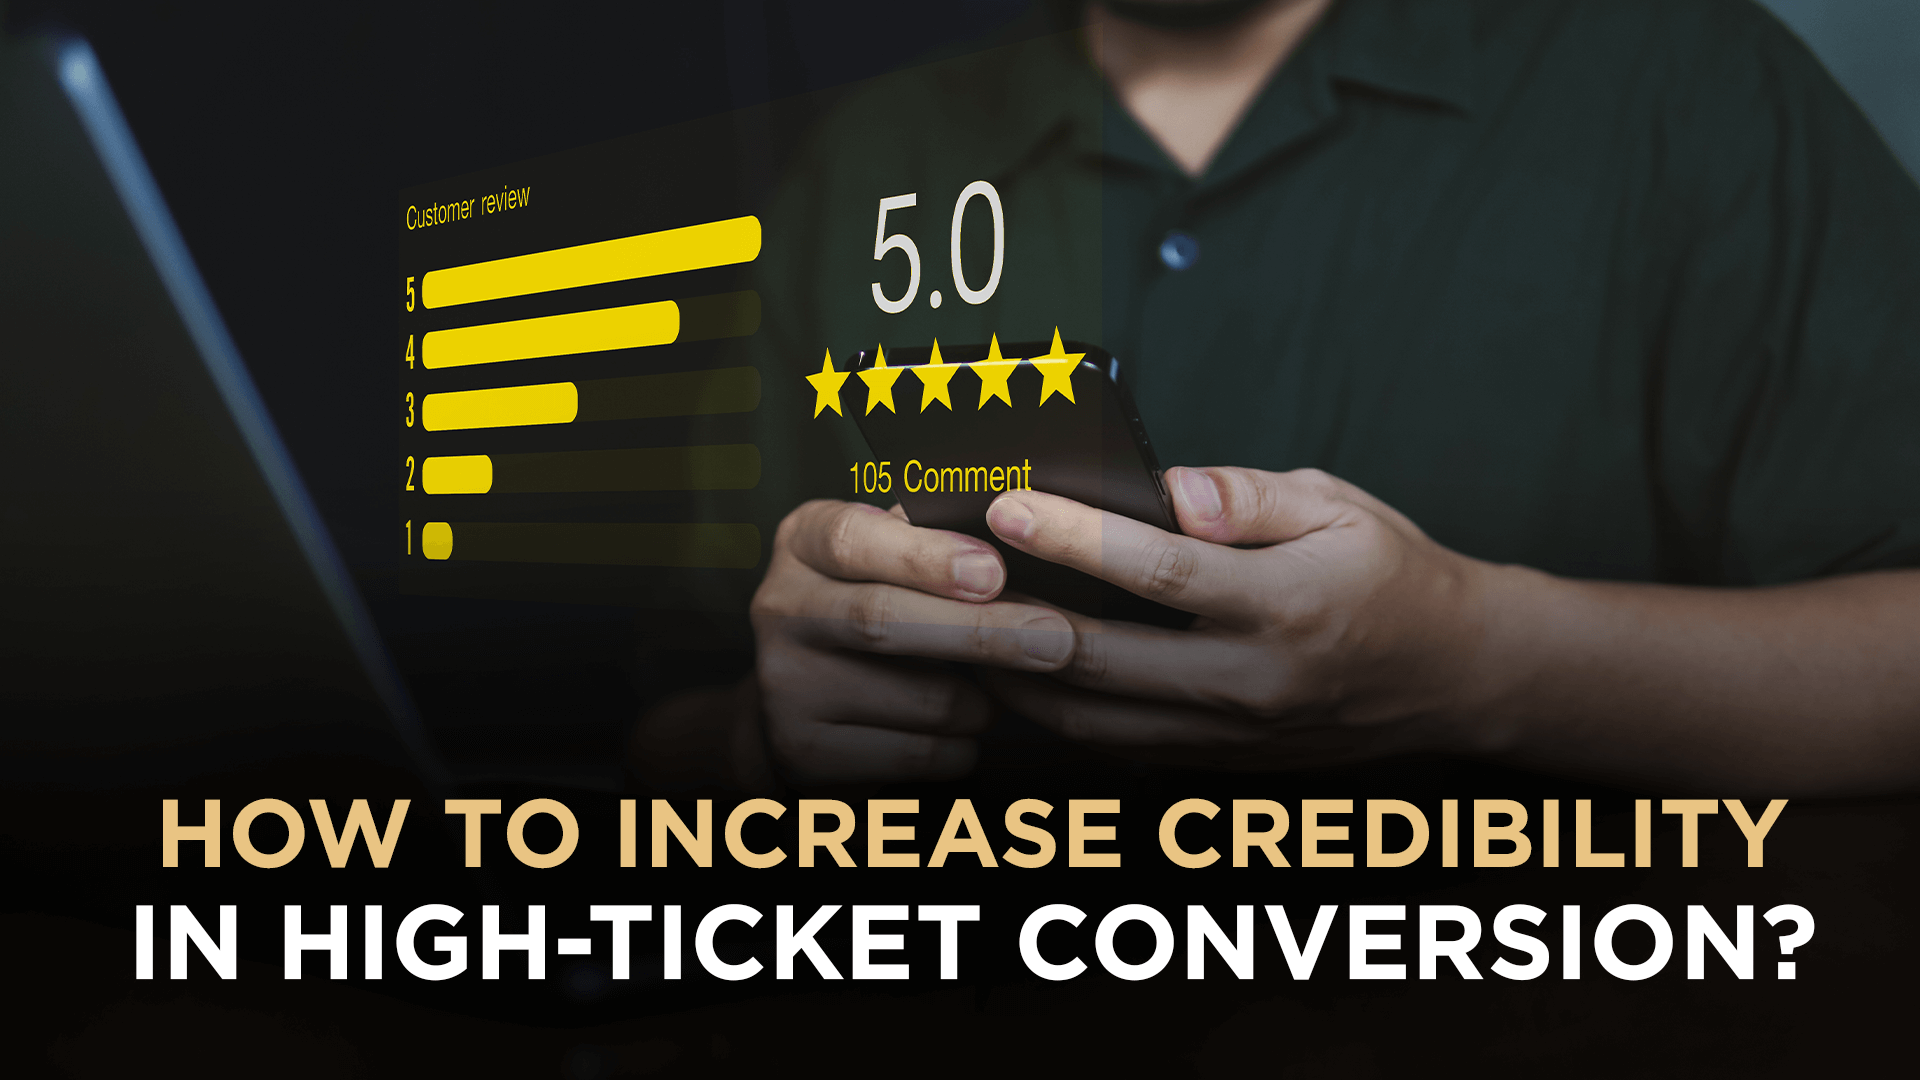 How to Increase Credibility in High-Ticket Conversion